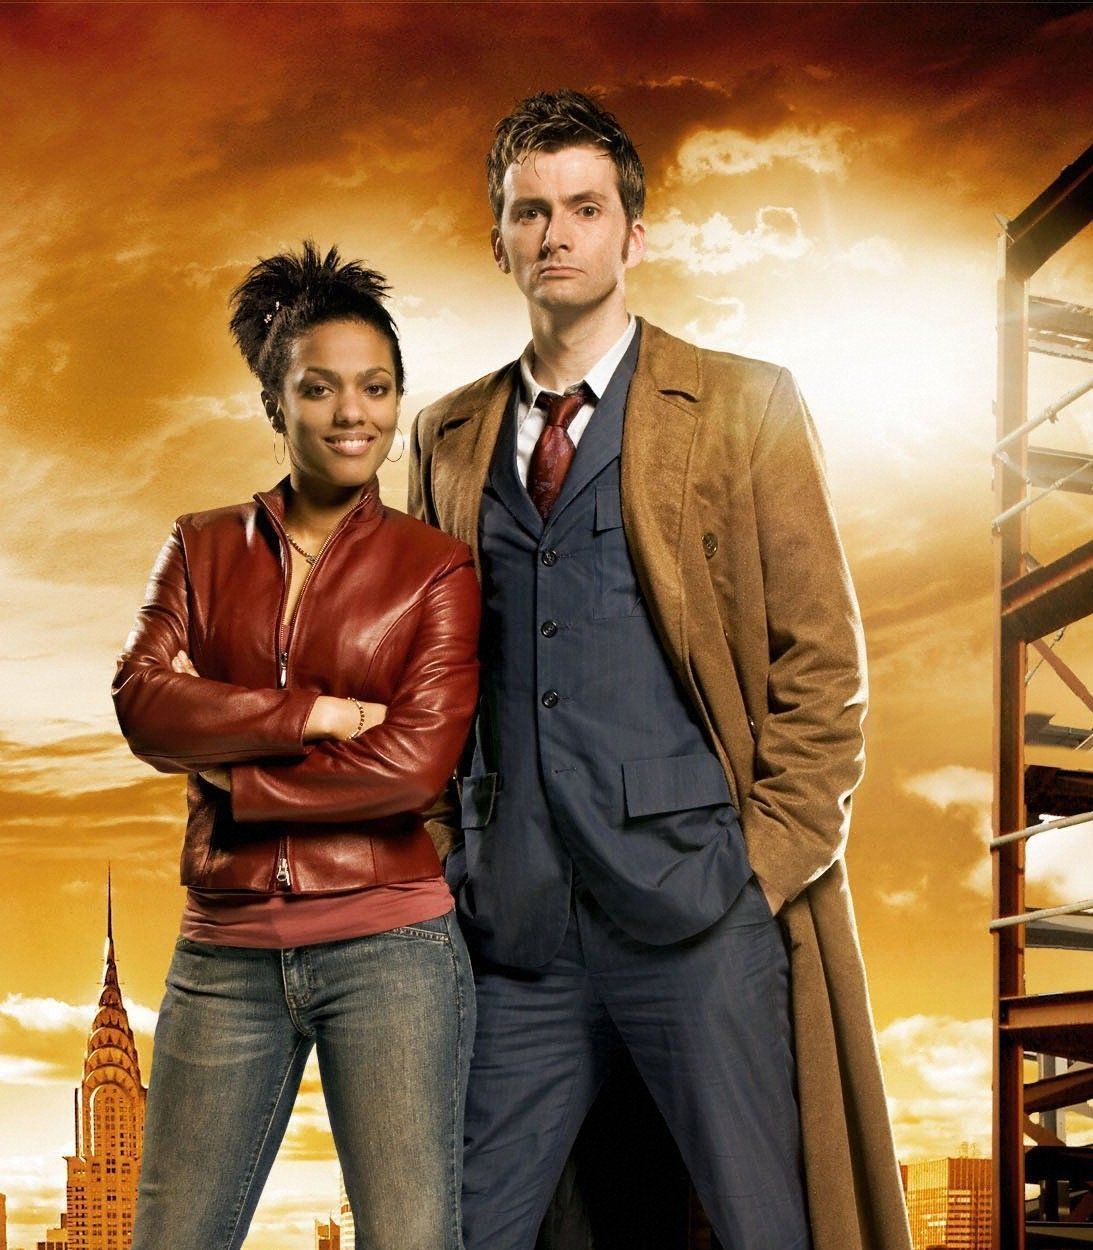 Freema Agyeman as Martha and David Tennant as Tenth Doctor in Doctor Who